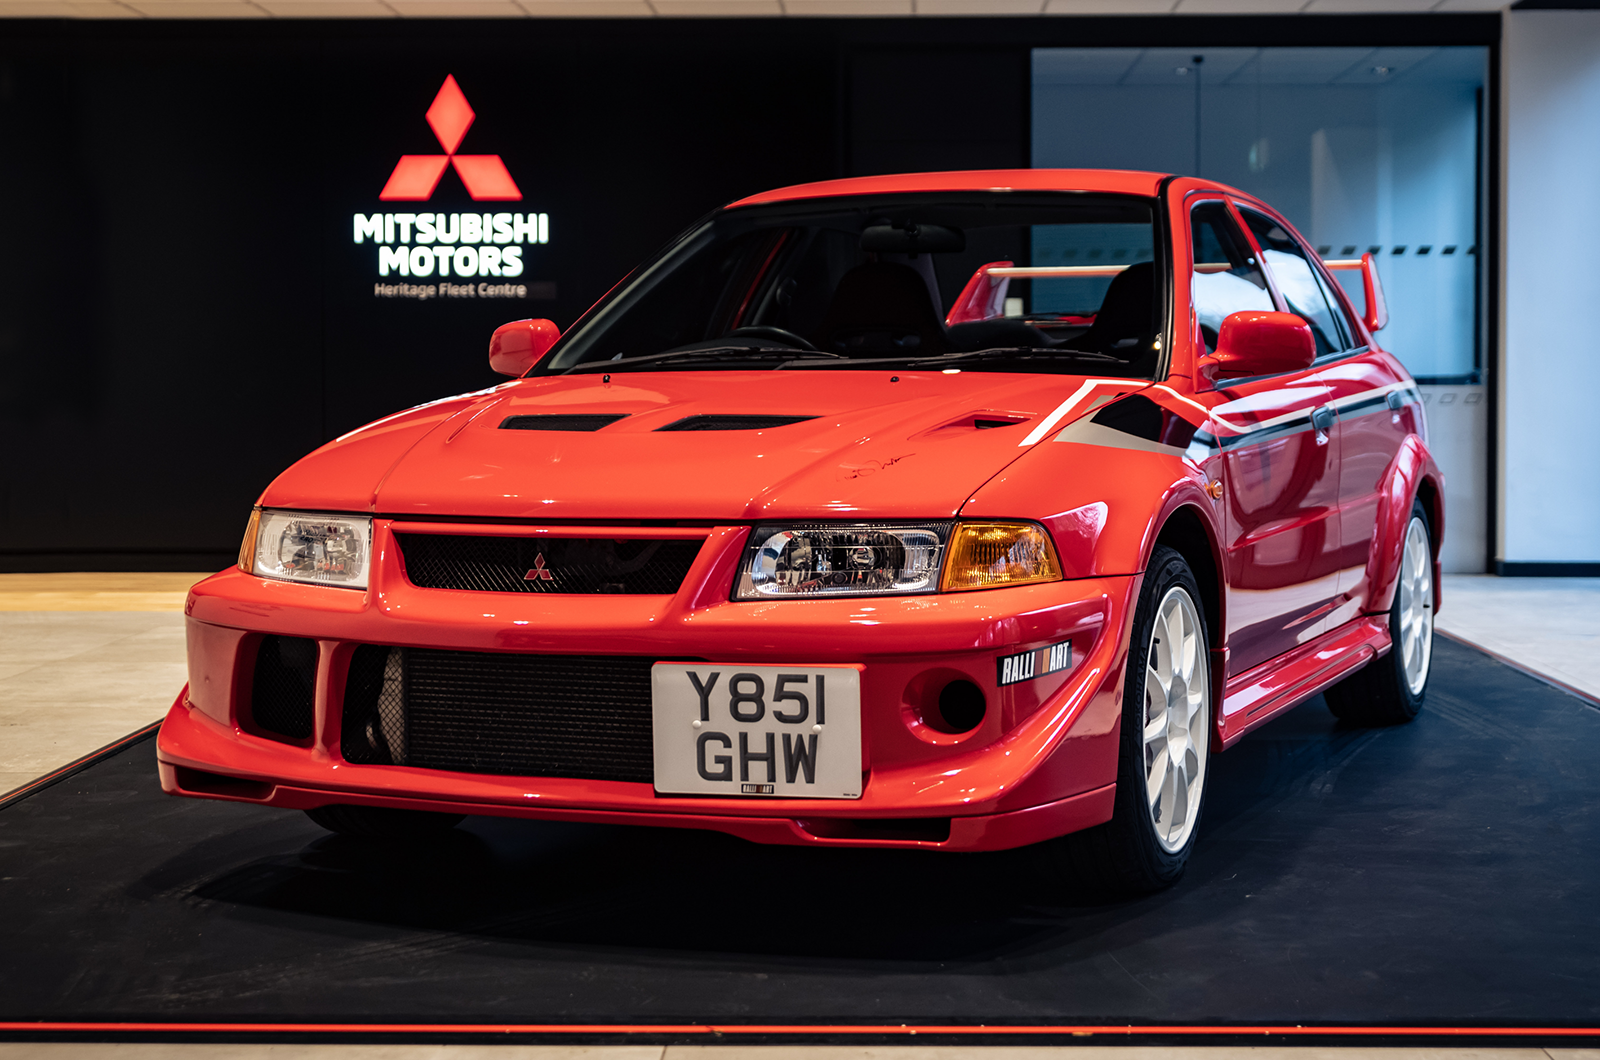 Classic & Sports Car – Japanese motoring icons are coming to London Concours